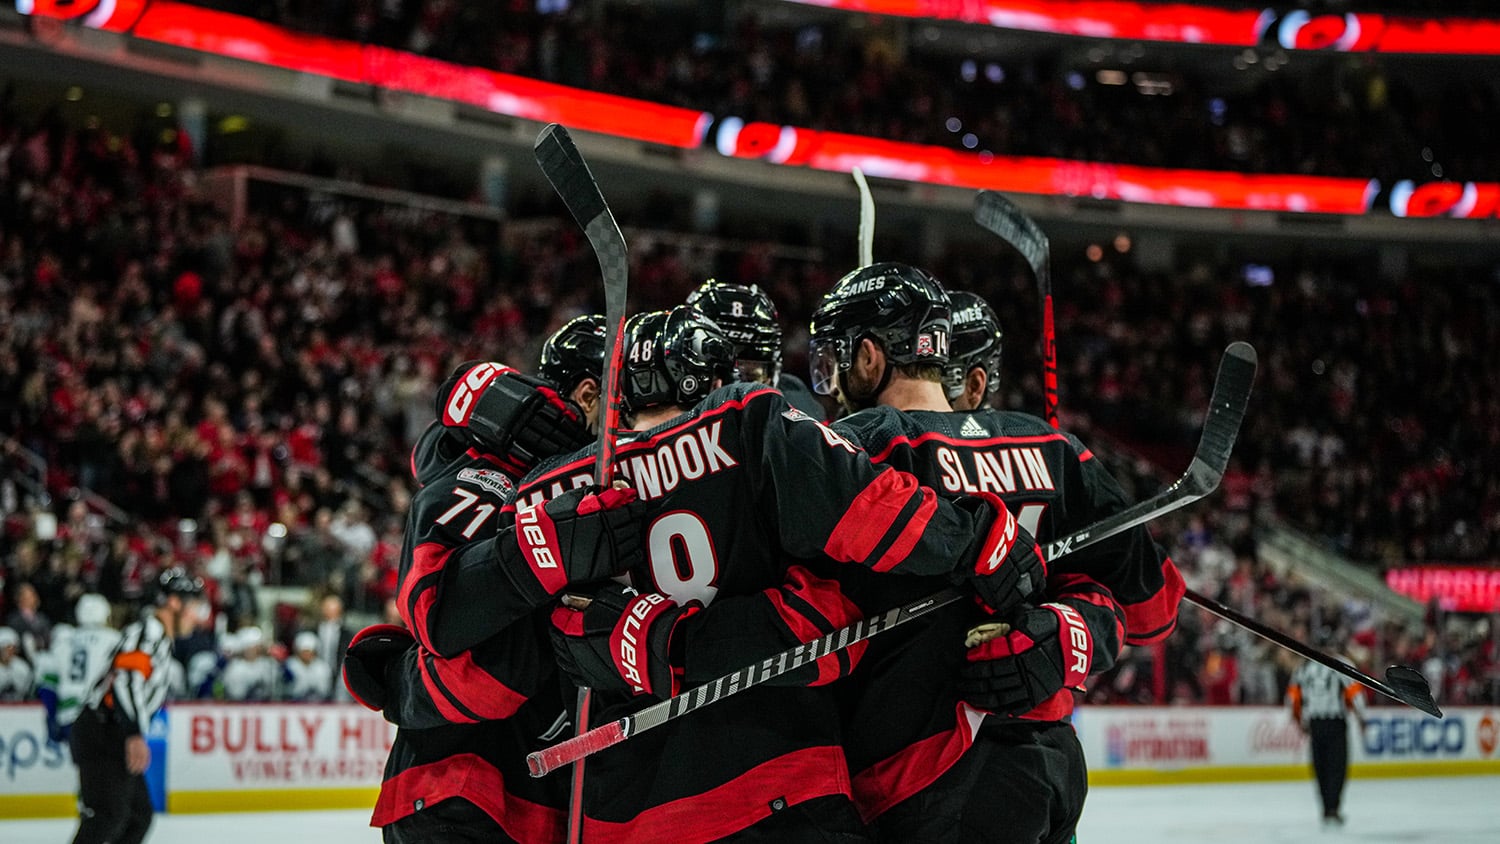 Image from the NHL Game between the Vancouver Canucks and Carolina Hurricanes at PNC Arena on January 15, 2023 in Raleigh, North Carolina. (Photo by Josh Lavallee/NHLI via Getty Images)